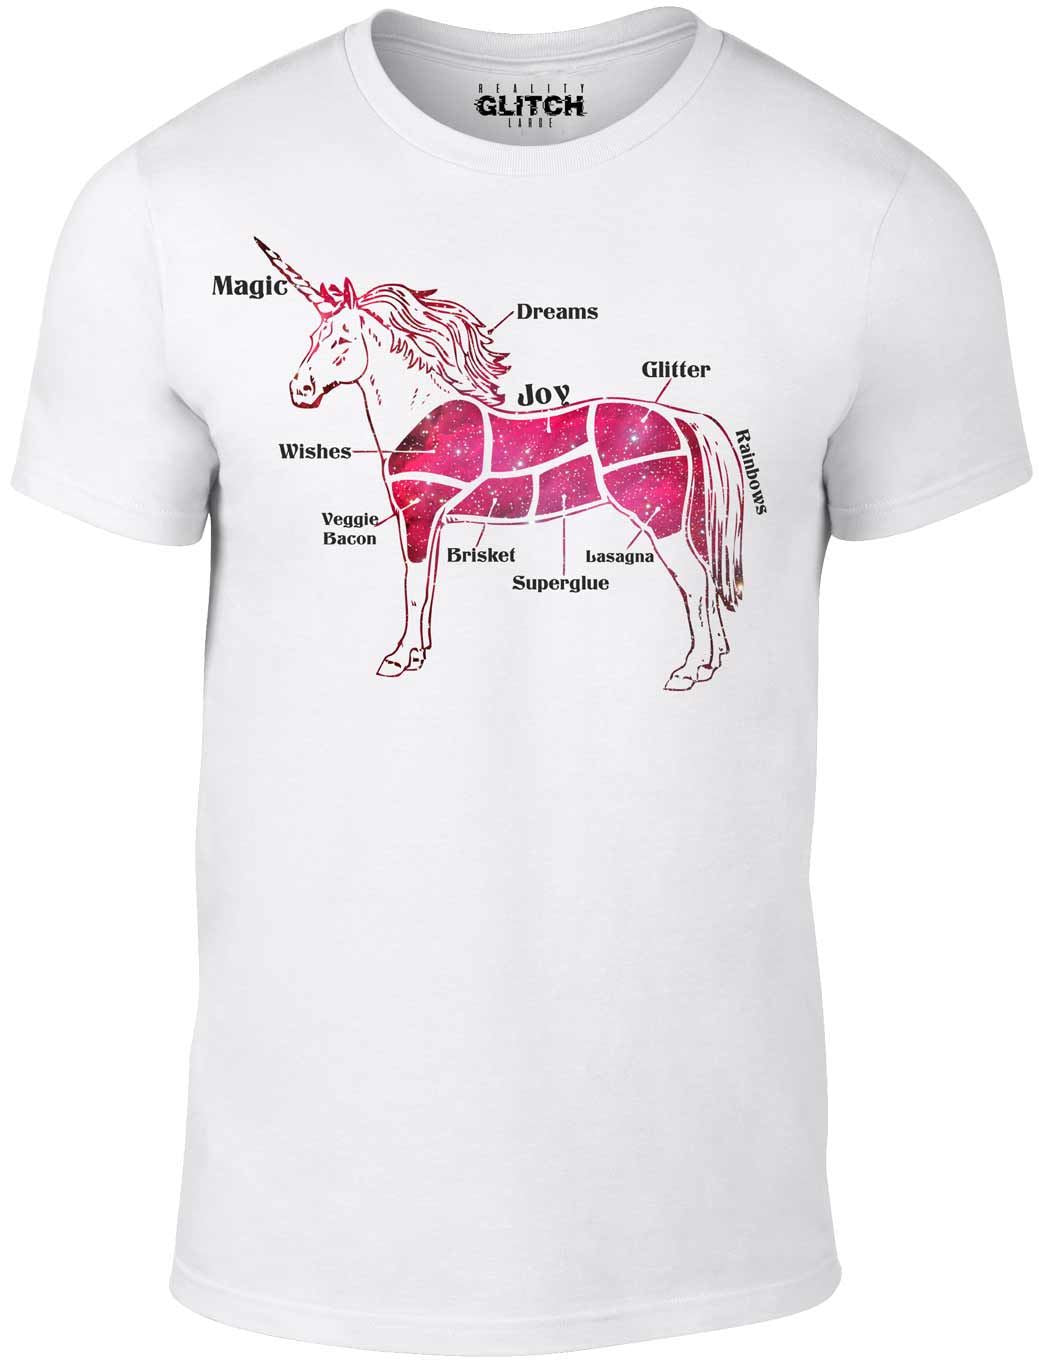 Men's White T-Shirt With a Unicorn diagram showing the butcher cuts Printed Design